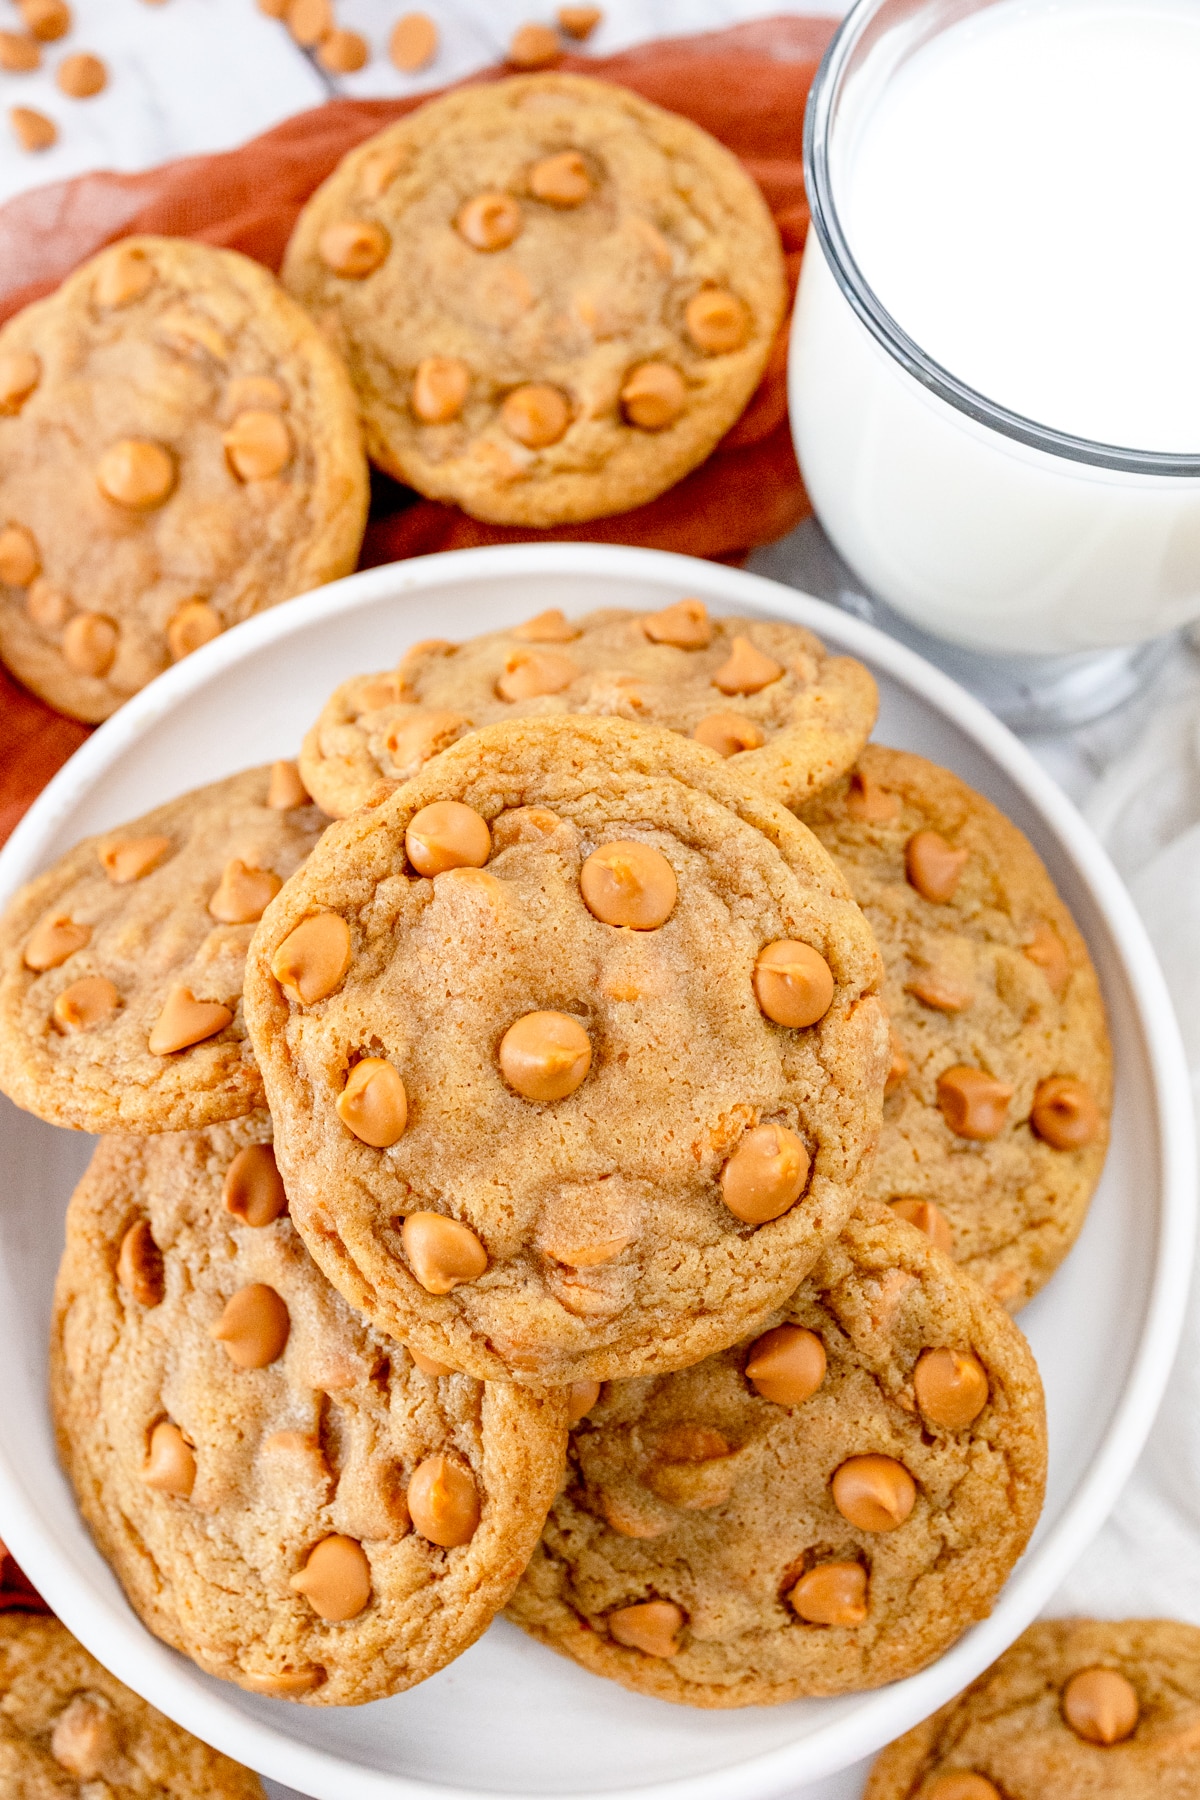 Top view of a plate of Butterscotch Chip Cookies, next to a glass of milk with other cookies around it.